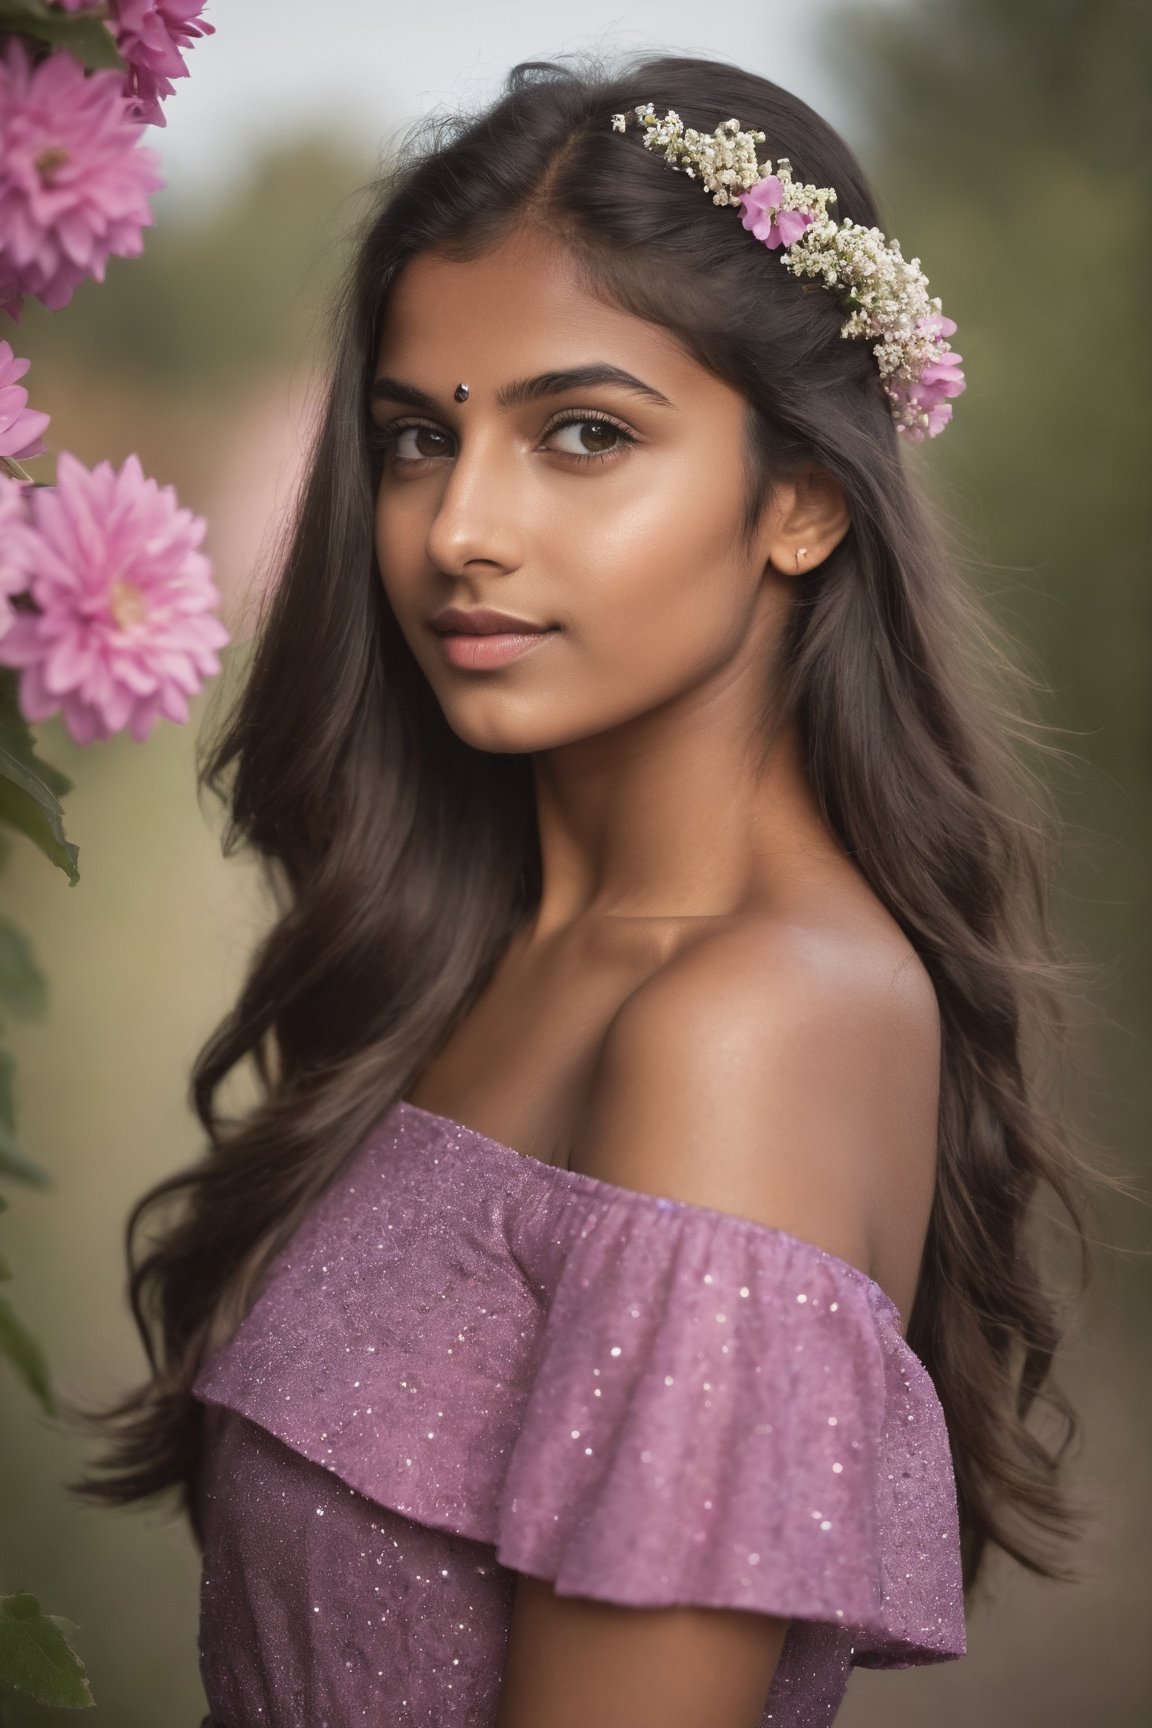 Indian Girl, 20 year old, Hasselblad Award Winner, 50mm, a very cute finnish girl, Diffrent modelling pose, front right facing, pony hair, loving, confident, sparkling yes, Dark Brown half-up half-down hairstyle , glossy buff skin texture, sweet and tender girl, adorable face, warm light, half sleeve pink dress with purple flowers Print,